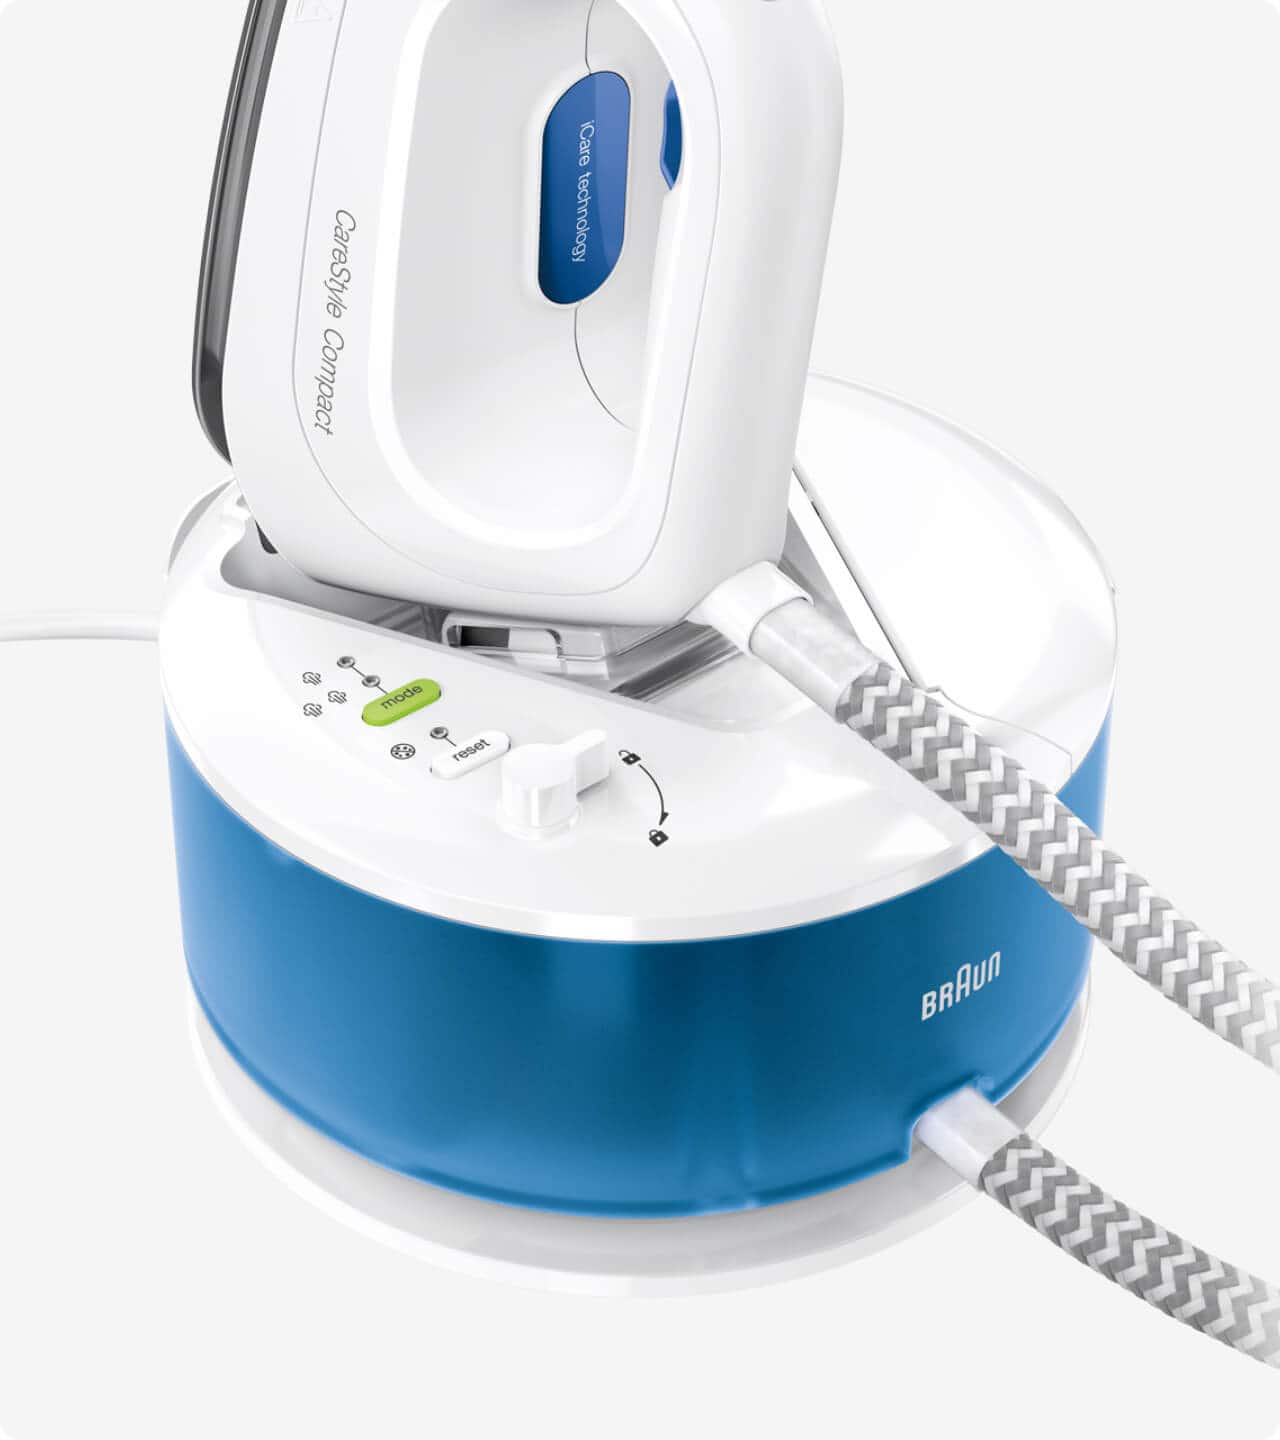 Braun CareStyle Compact: lightweight and compact